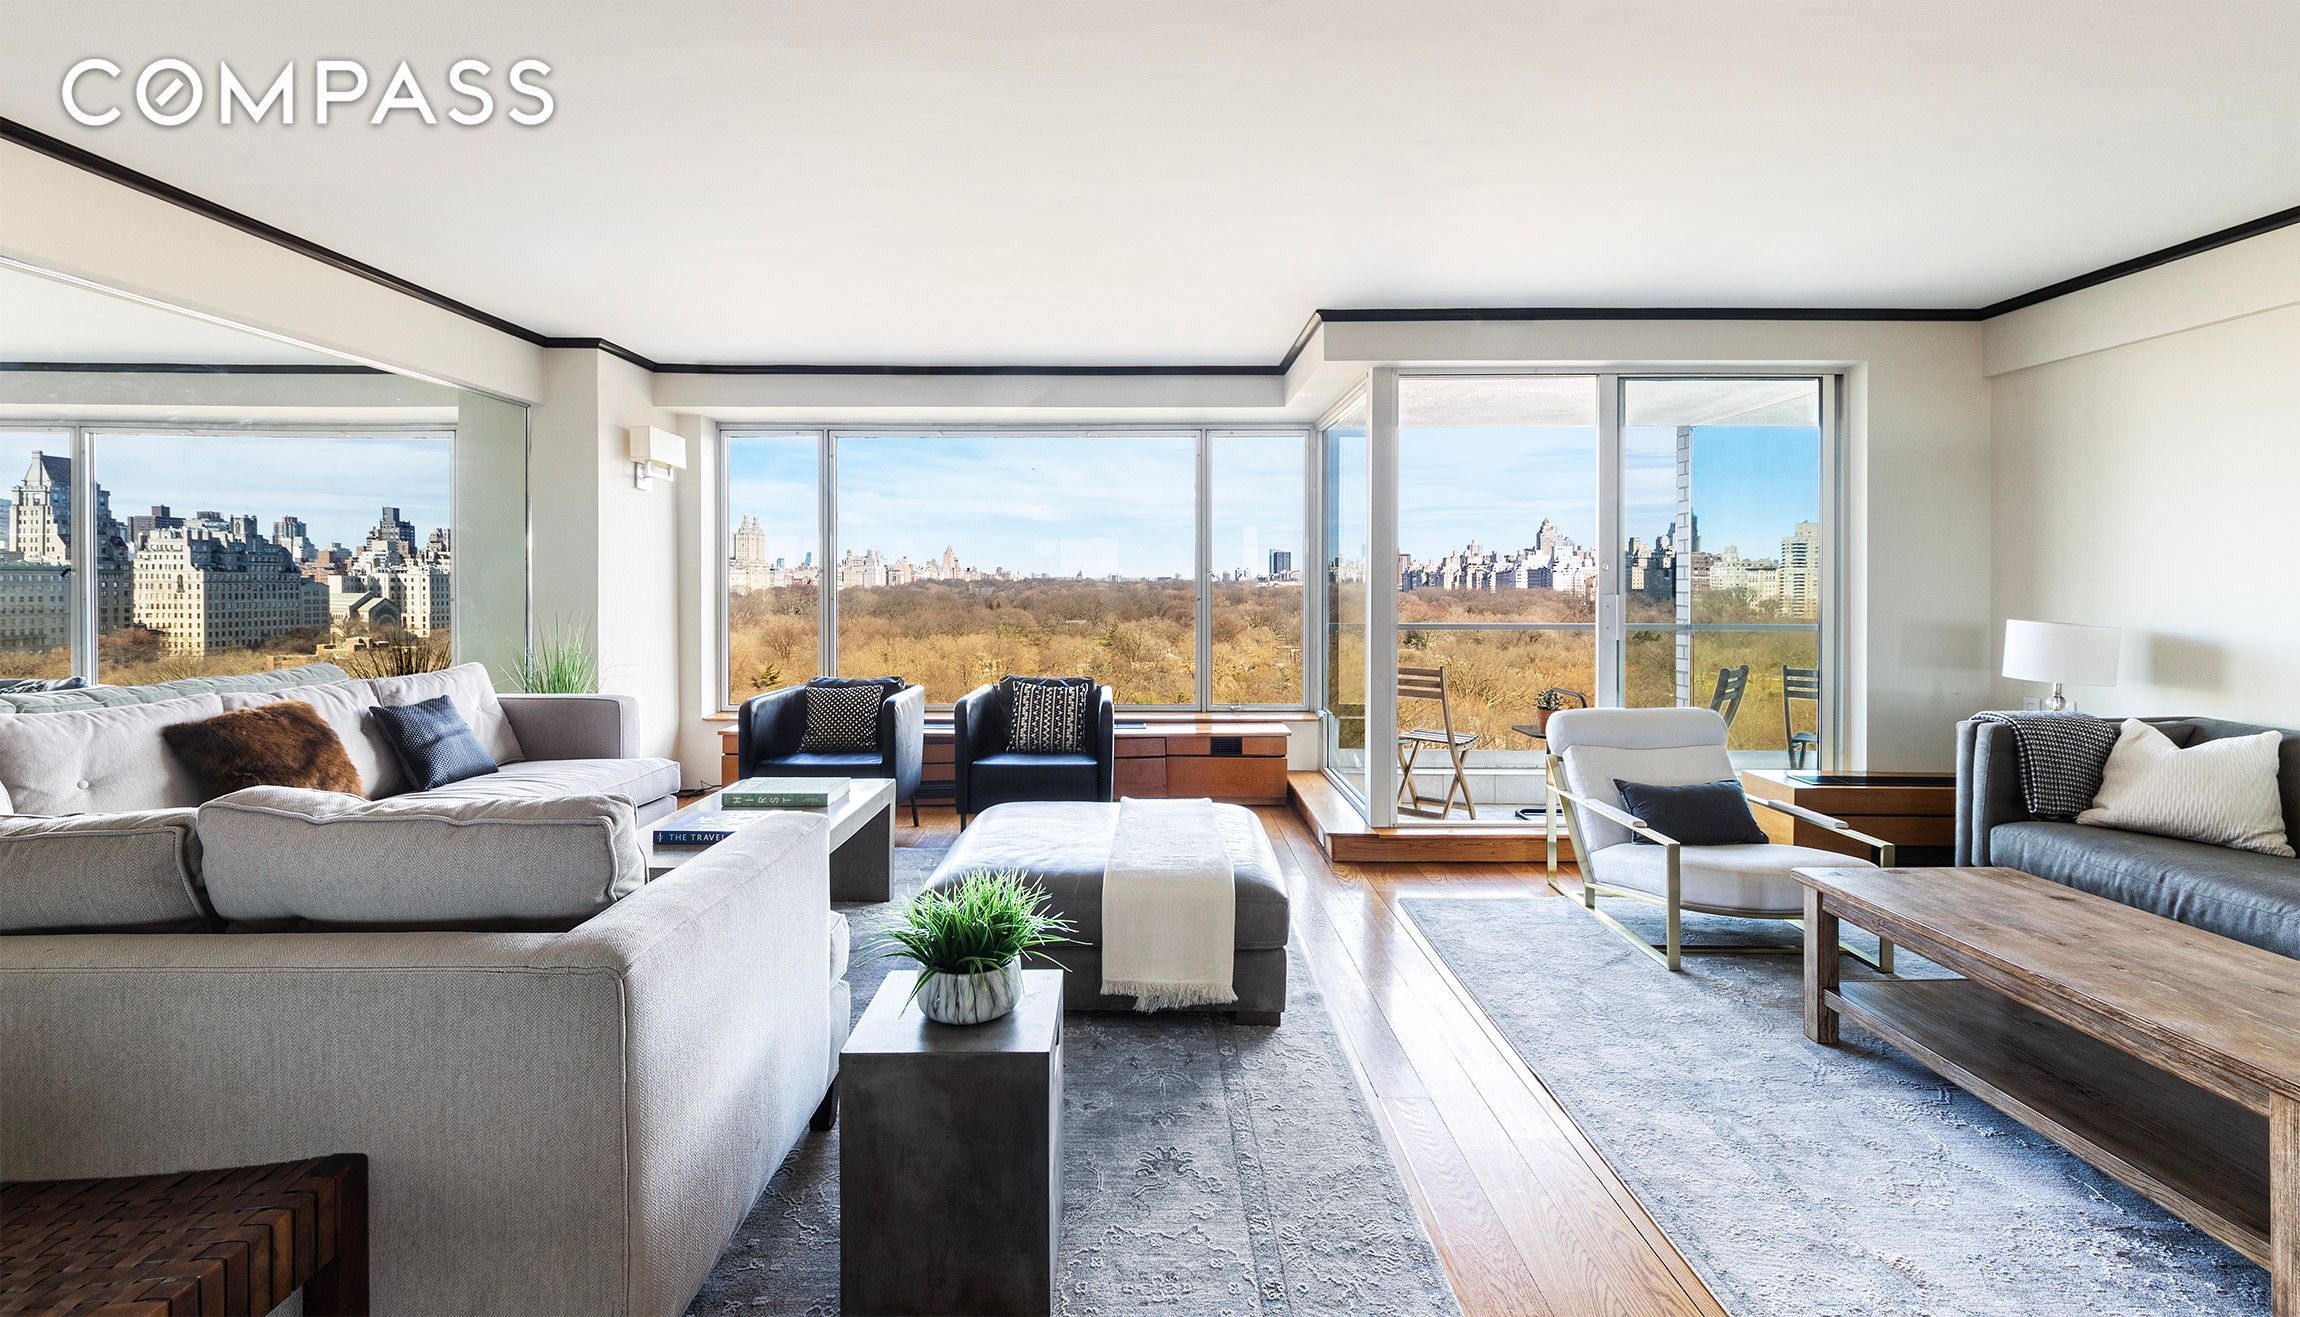 116 Central Park 16N, Central Park South, Midtown West, NYC - 2 Bedrooms  
2 Bathrooms  
4 Rooms - 